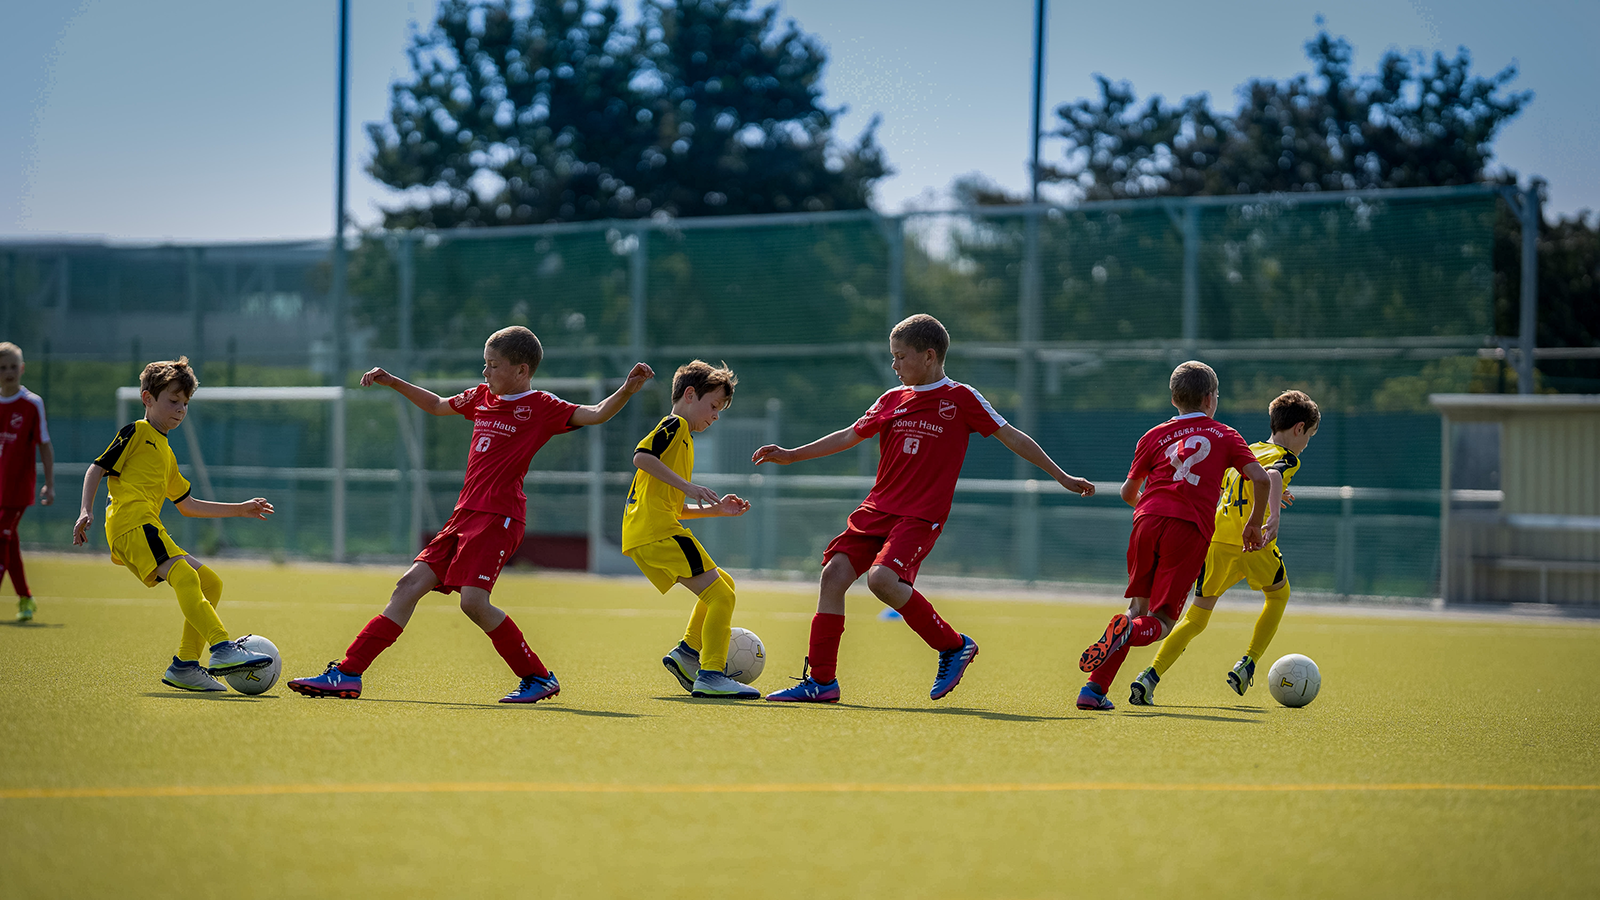 Summer Camps for Sports - Marin Magazine